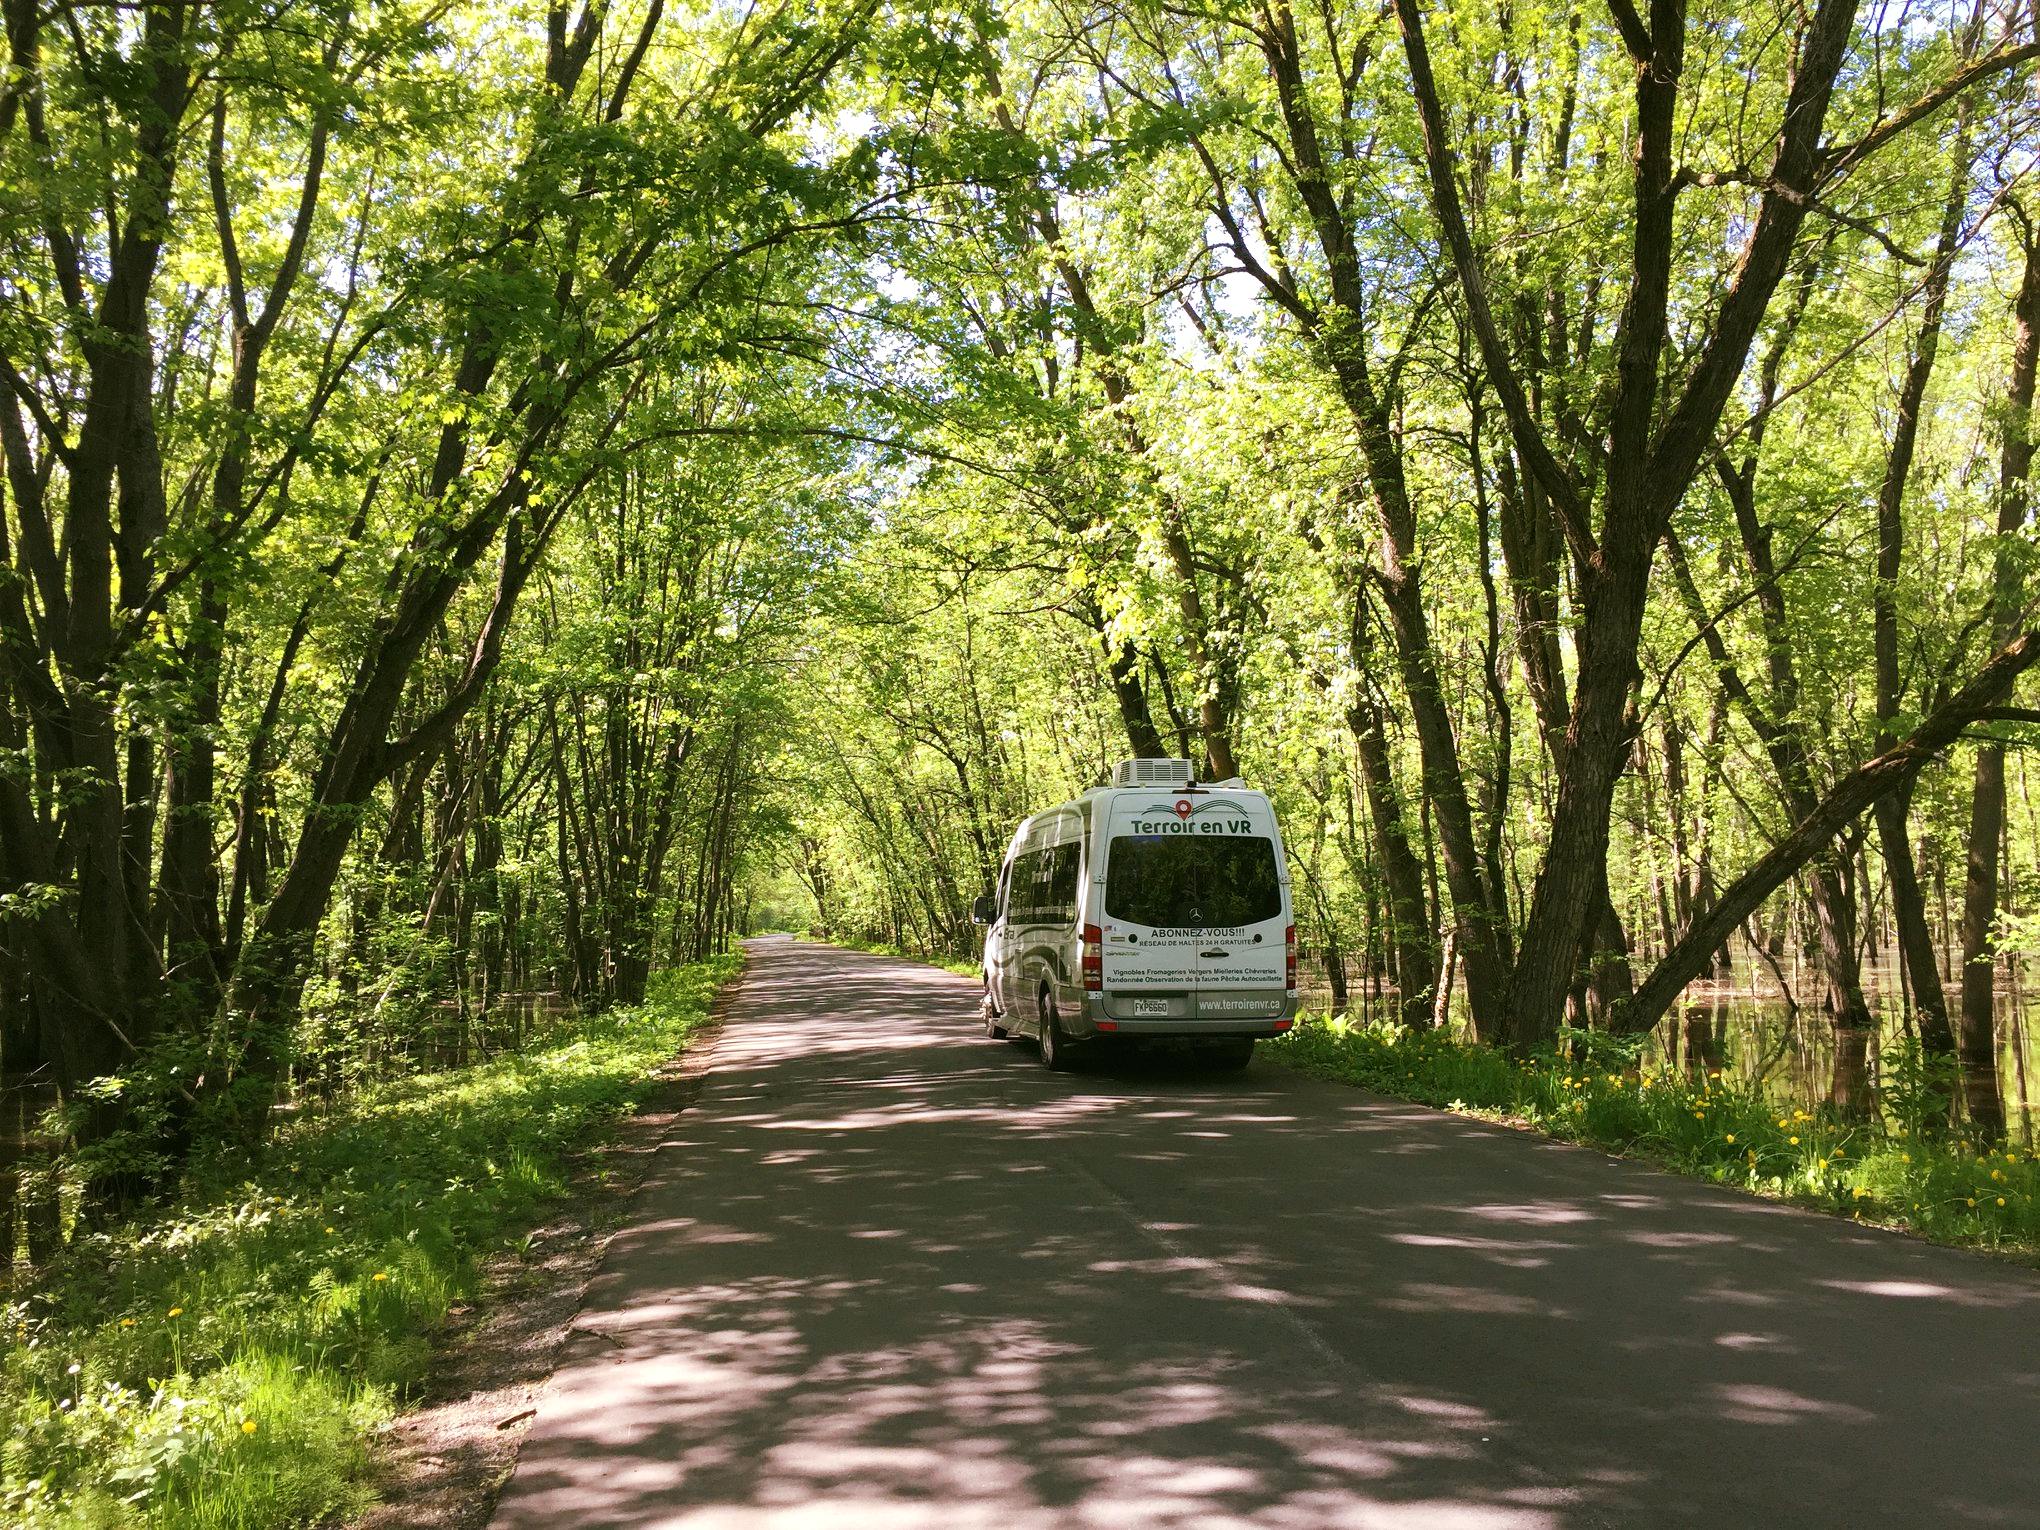 After a long winter, are you ready to head out on your first RV trip of the season? Here are five reasons to plan an RV trip with Terego this spring.